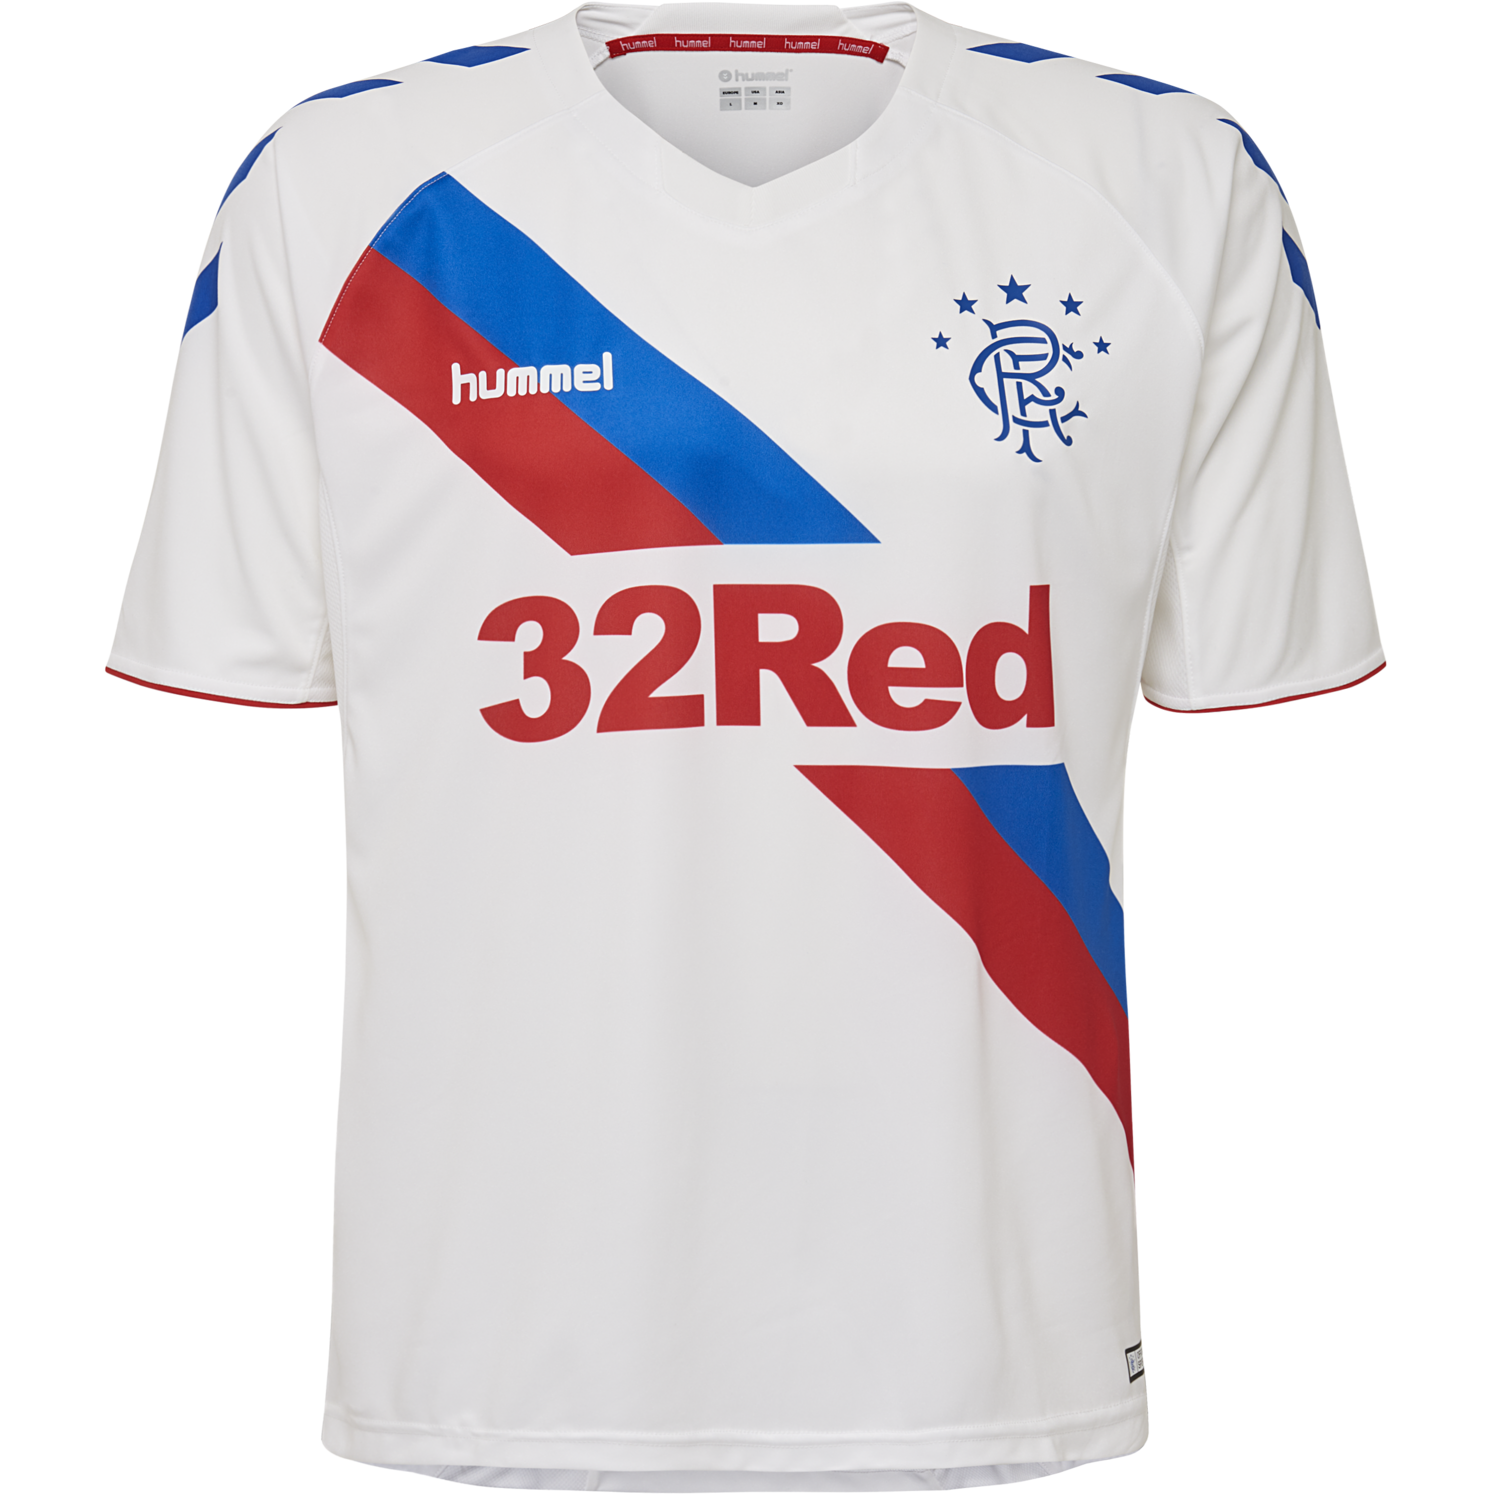 rangers fc gifts